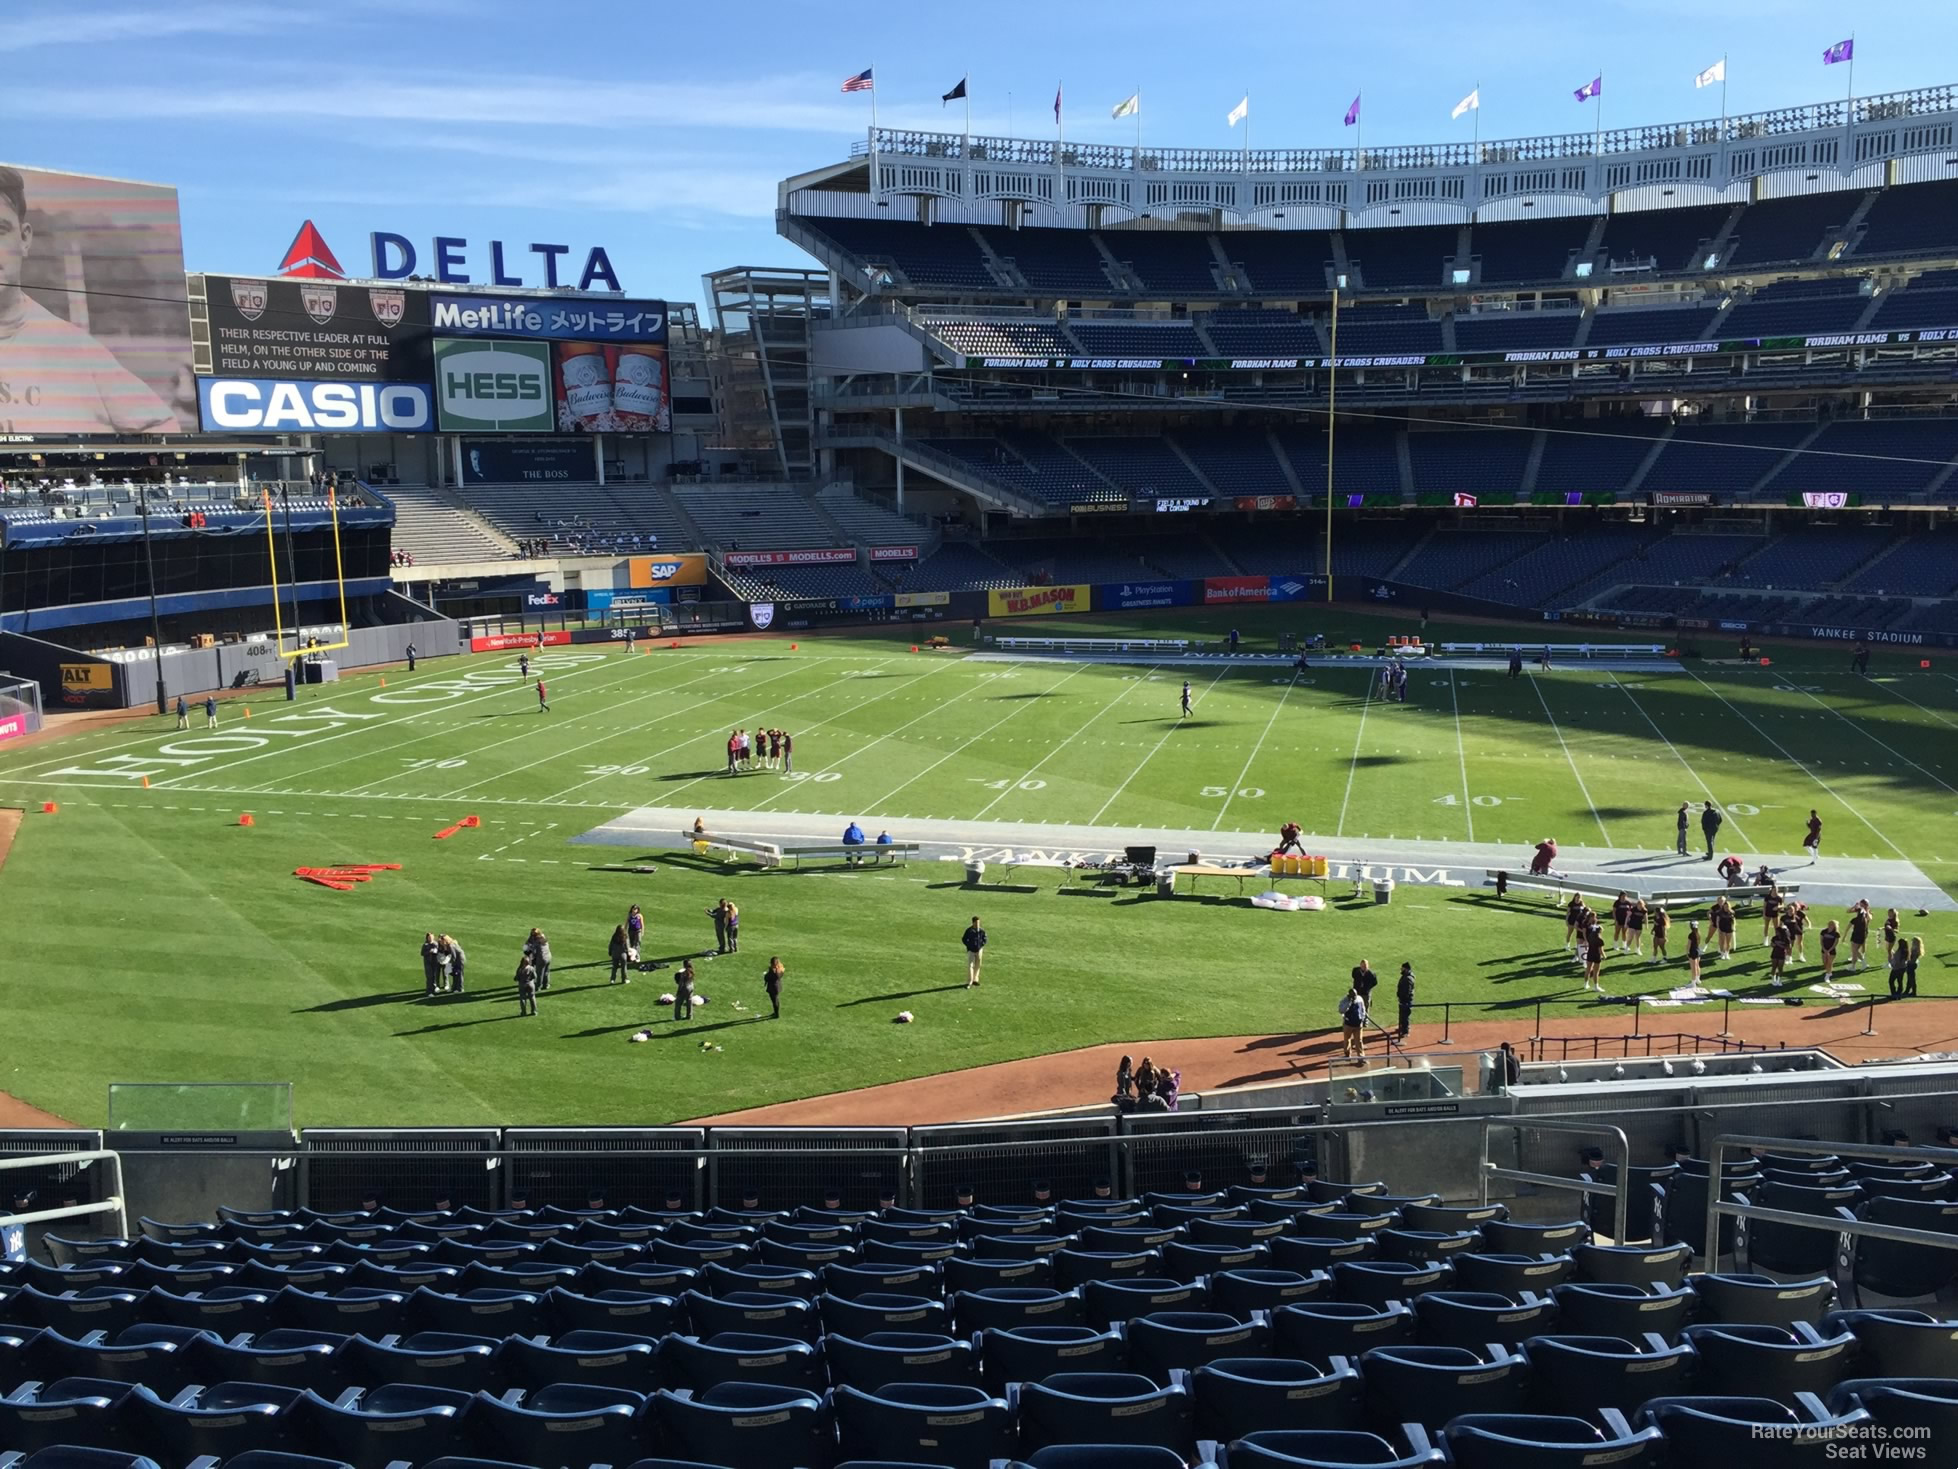 section 230, row 12 seat view  for football - yankee stadium